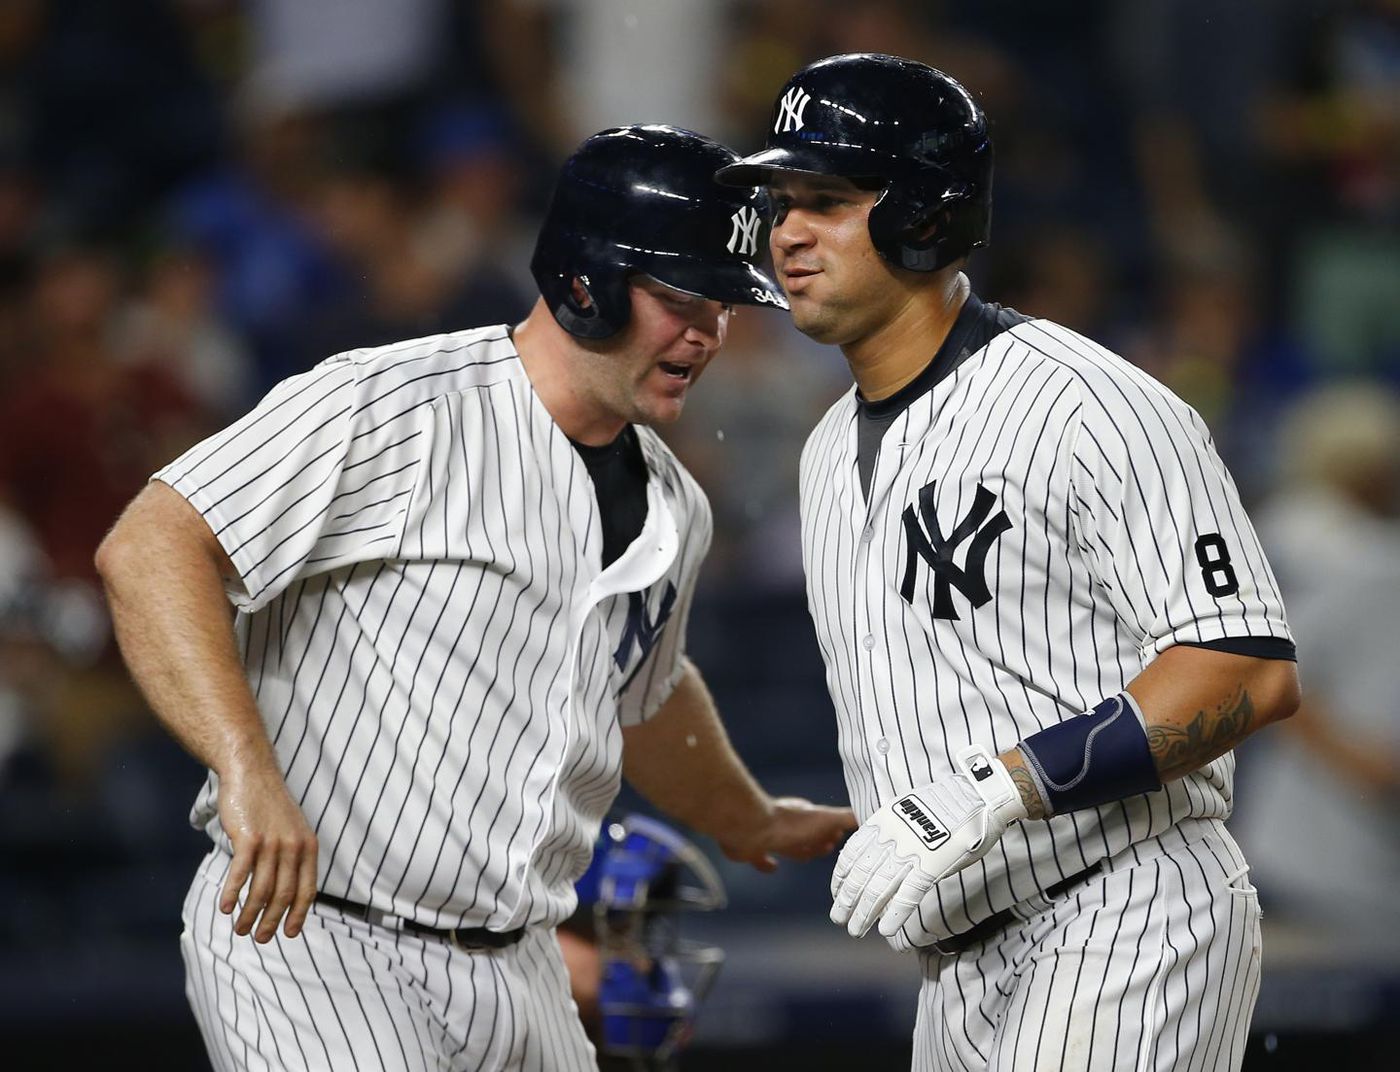 New York Yankees: The 5 greatest catchers in franchise history